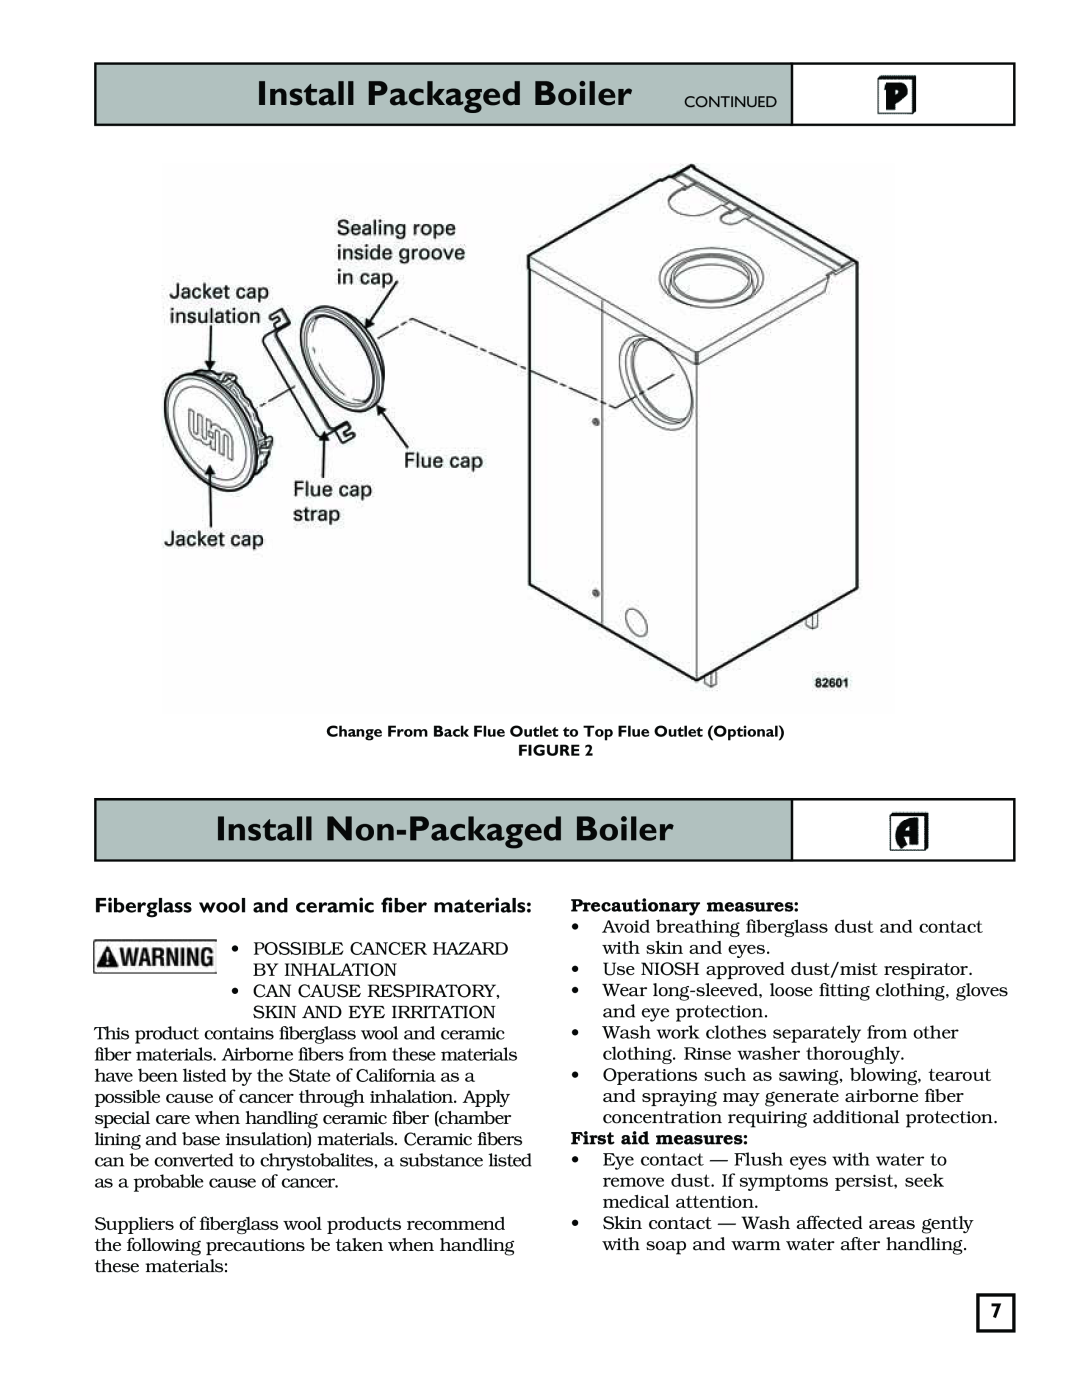 Weil-McLain 550-141-829/1201 manual Install Packaged Boiler CONTINUED, Install Non-PackagedBoiler, Precautionary measures 